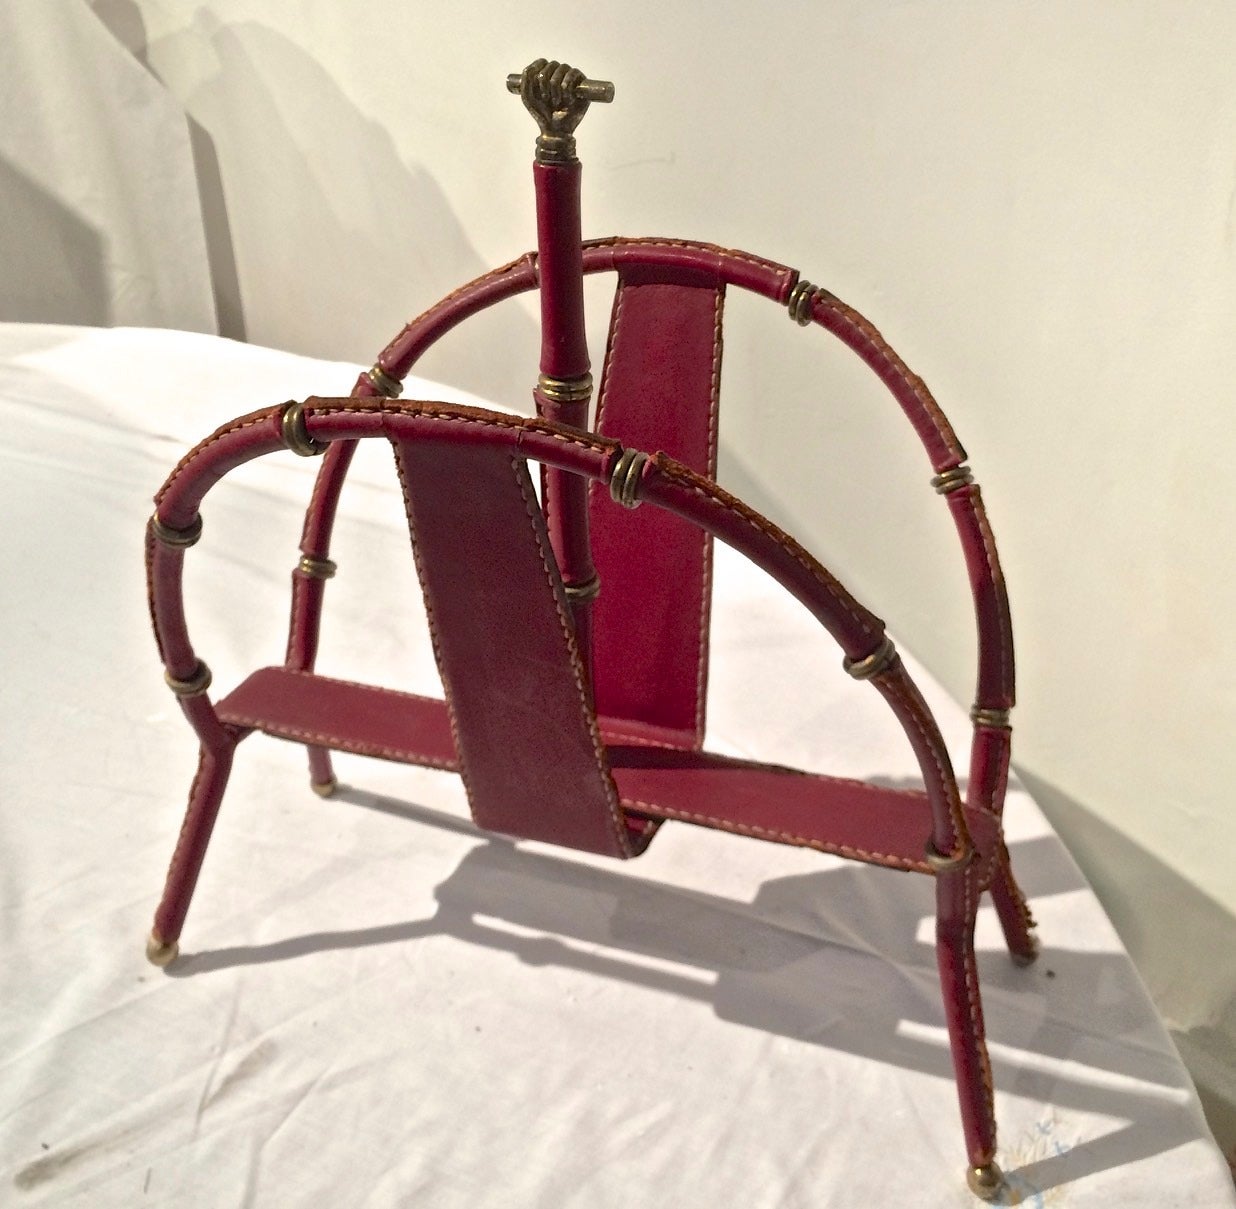 Jacques Adnet Hand-Stitched Leather Magazine Rack in Red Hermès Color 1